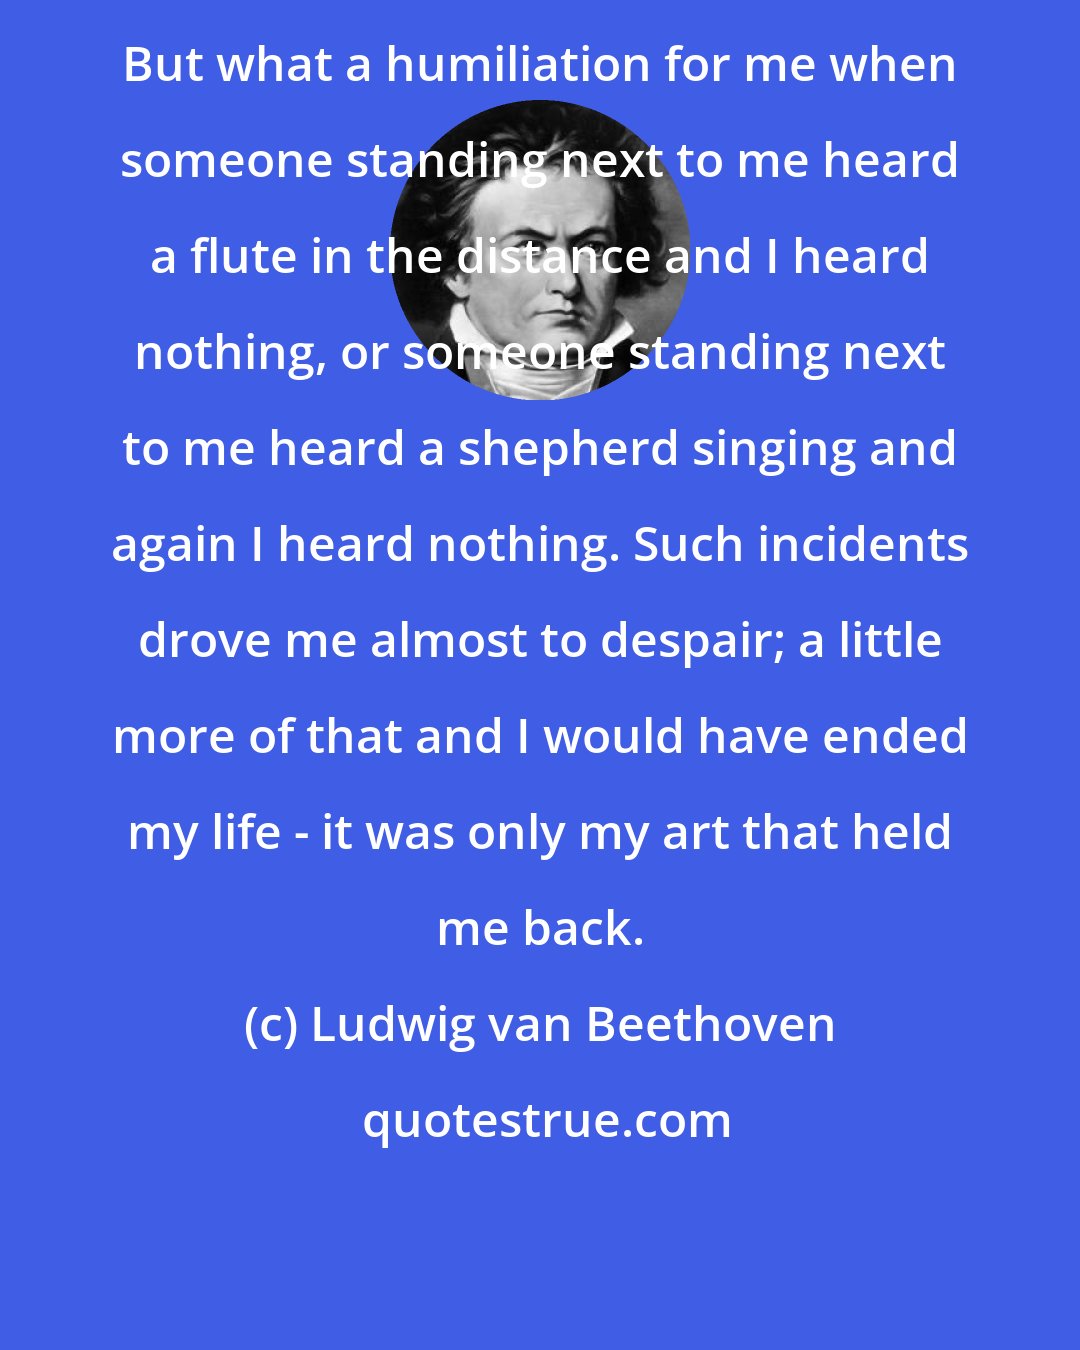 Ludwig van Beethoven: But what a humiliation for me when someone standing next to me heard a flute in the distance and I heard nothing, or someone standing next to me heard a shepherd singing and again I heard nothing. Such incidents drove me almost to despair; a little more of that and I would have ended my life - it was only my art that held me back.